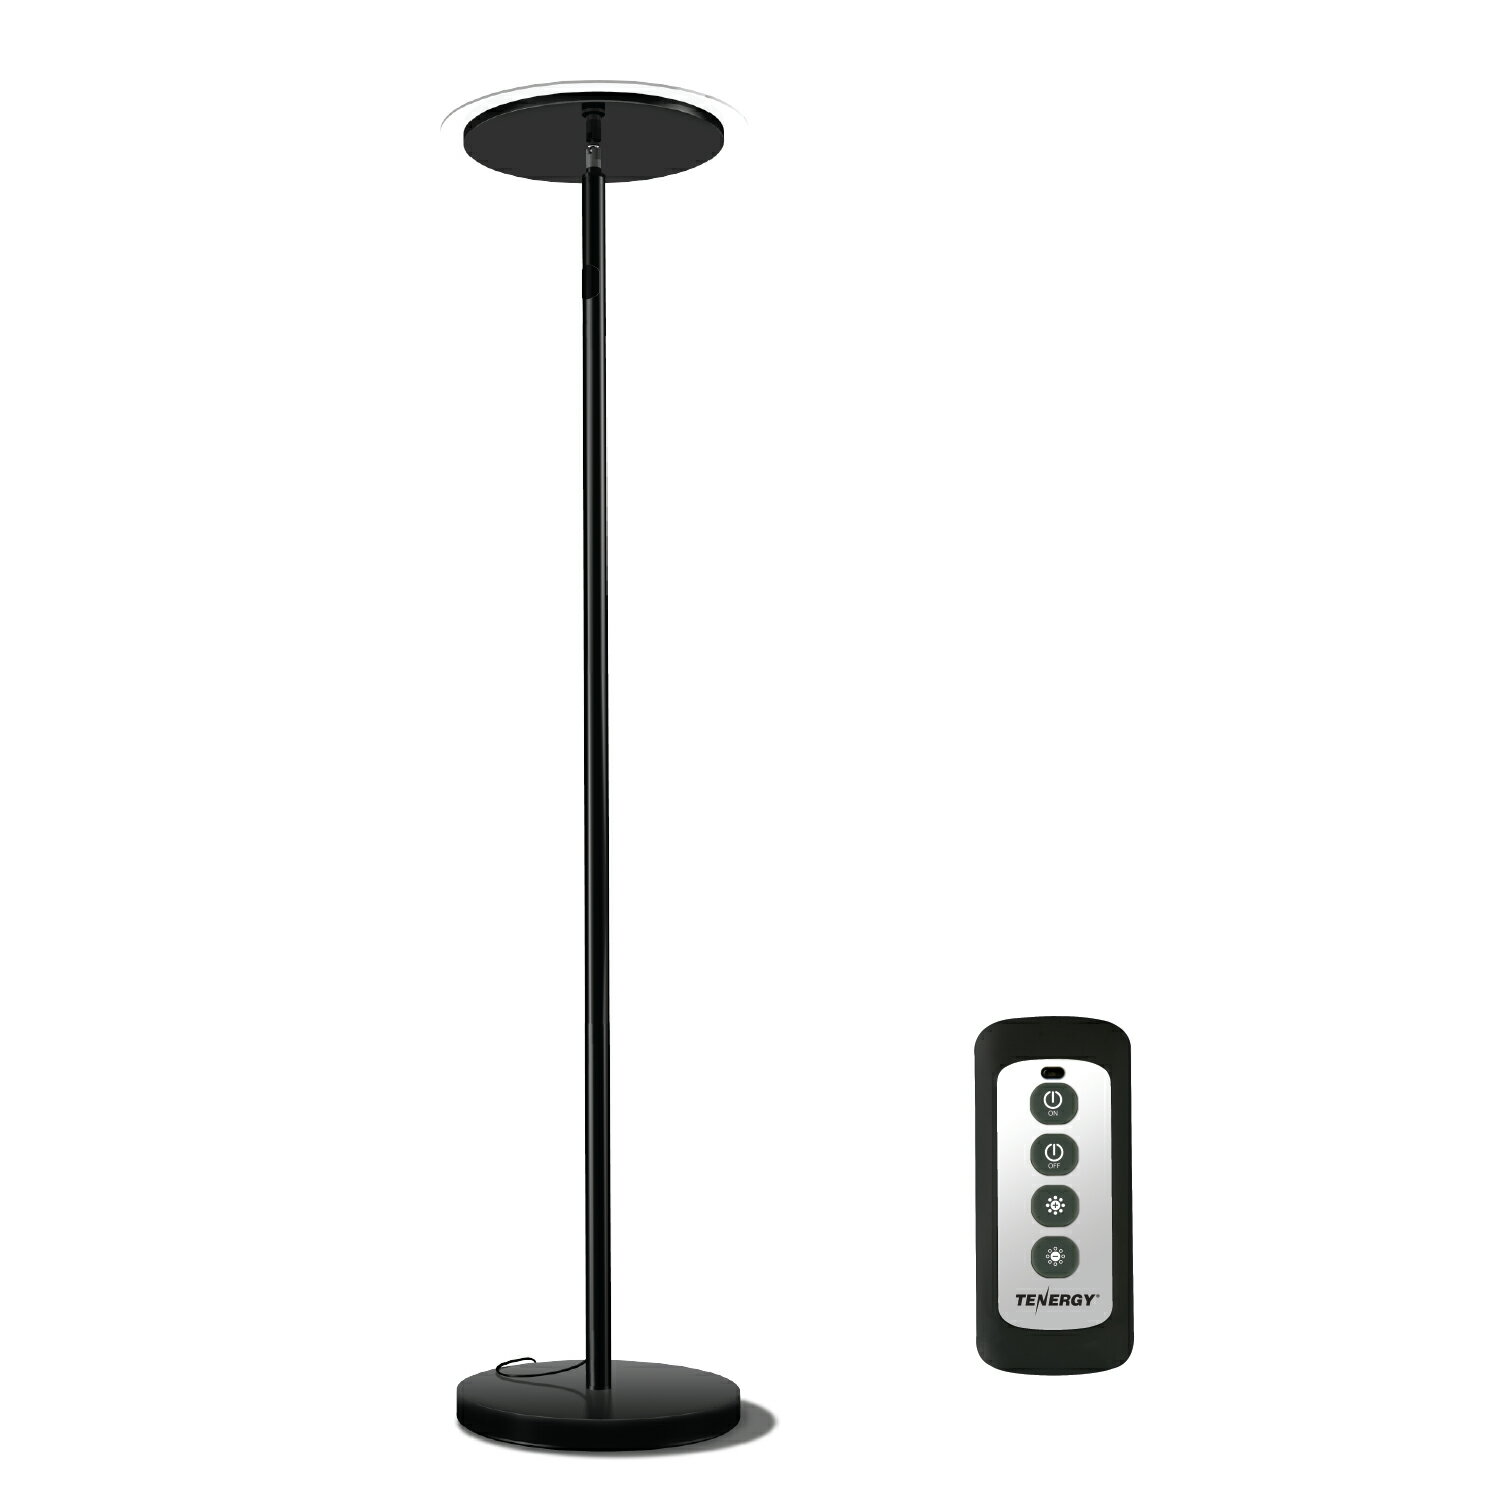 Tenergy Tenergy 70 Torchiere Dimmable Led Floor Lamp 30w Remote